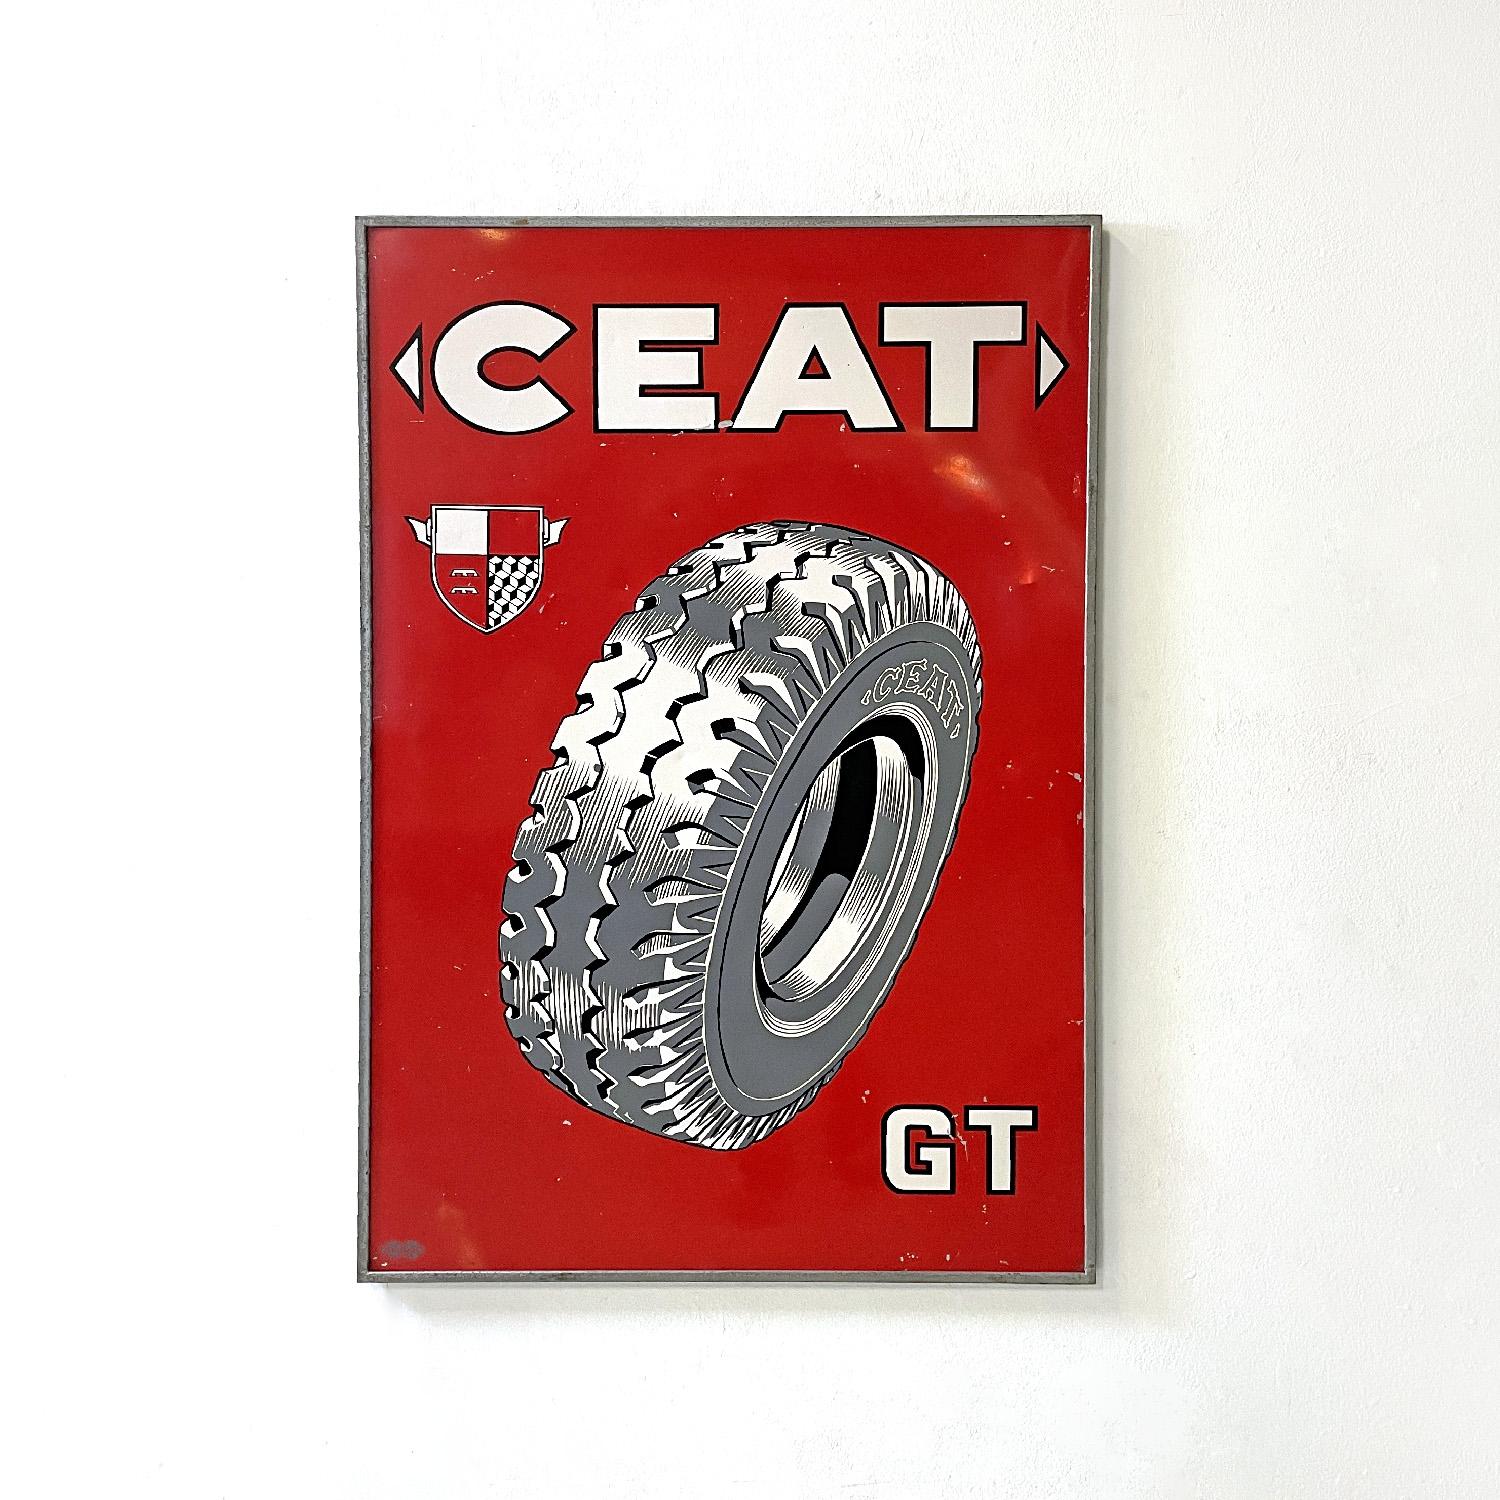 Italian mid-century modern red graphic Ceat advertising sign, 1950s
Rectangular aluminum sign or billboard. It features an advertising graphic from 